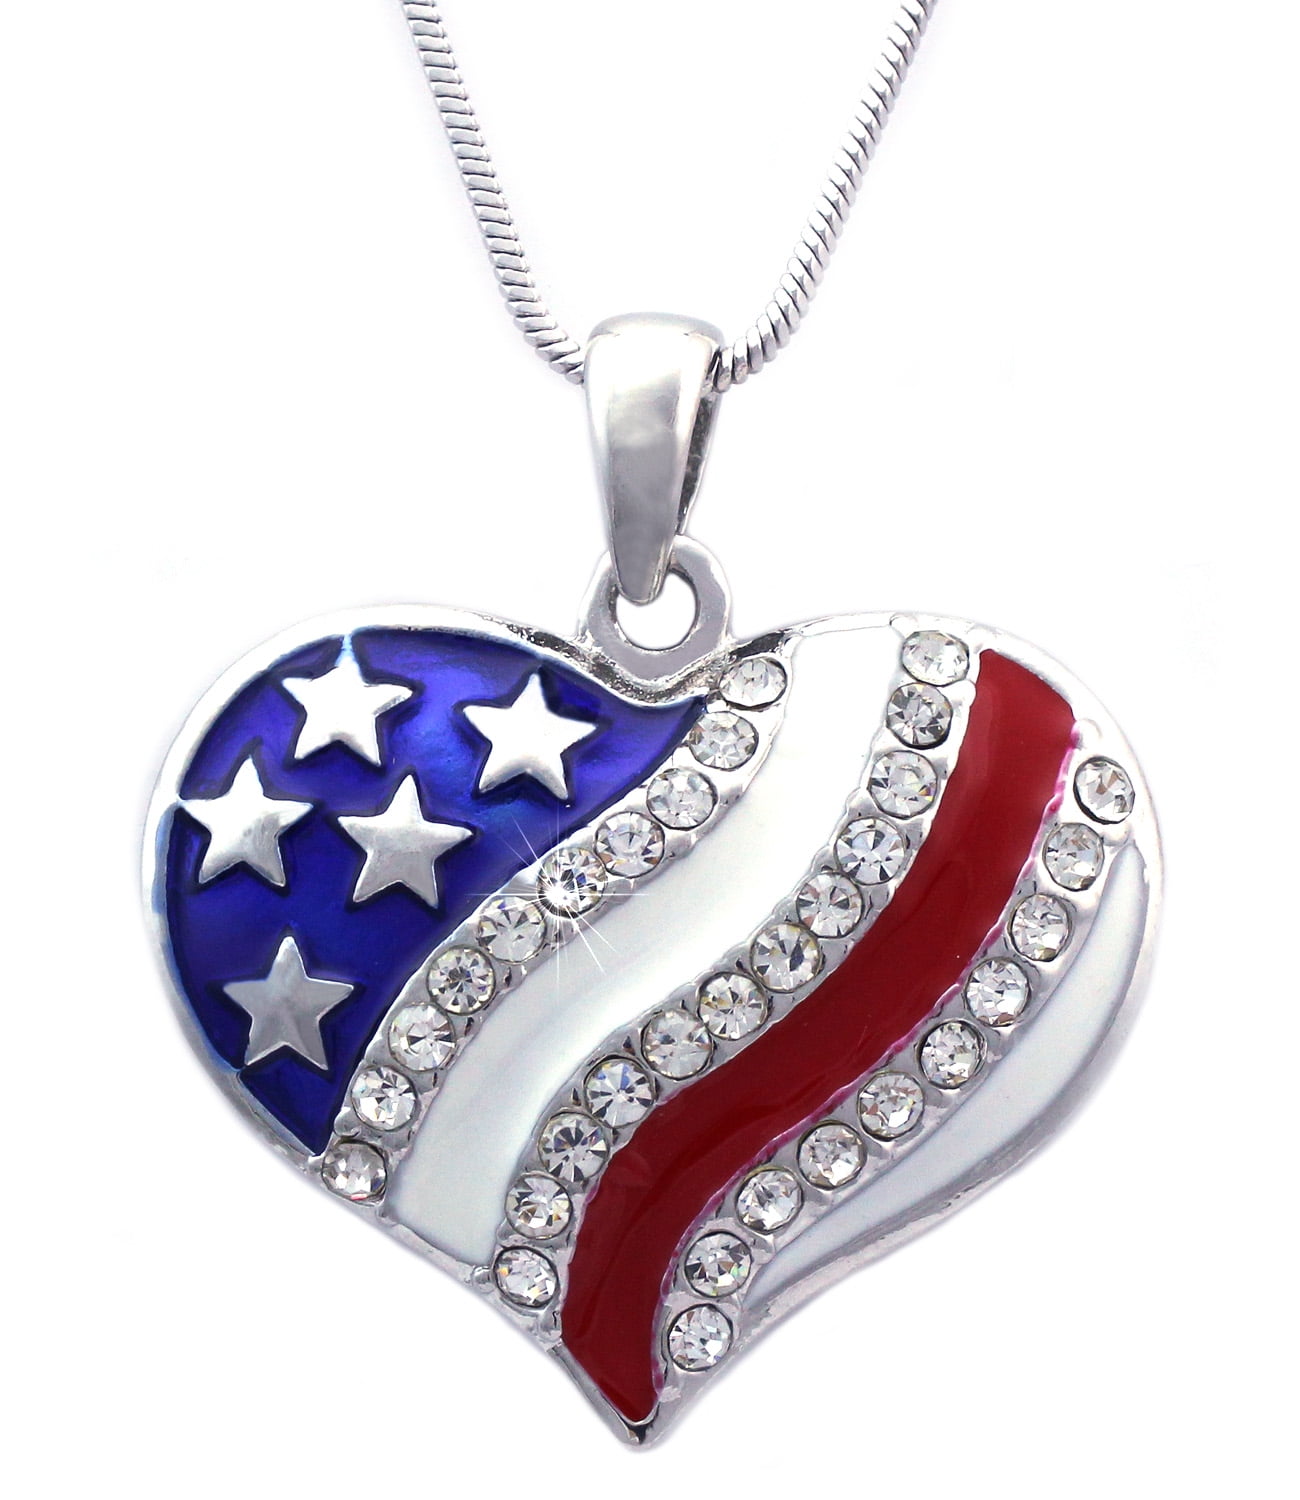 4th of July Necklace American Jewelry Patriotic Star Pendant USA Flag  Necklace Patriot Jewelry Sparkly Star Necklace on Choice Chain or Cord -  Etsy